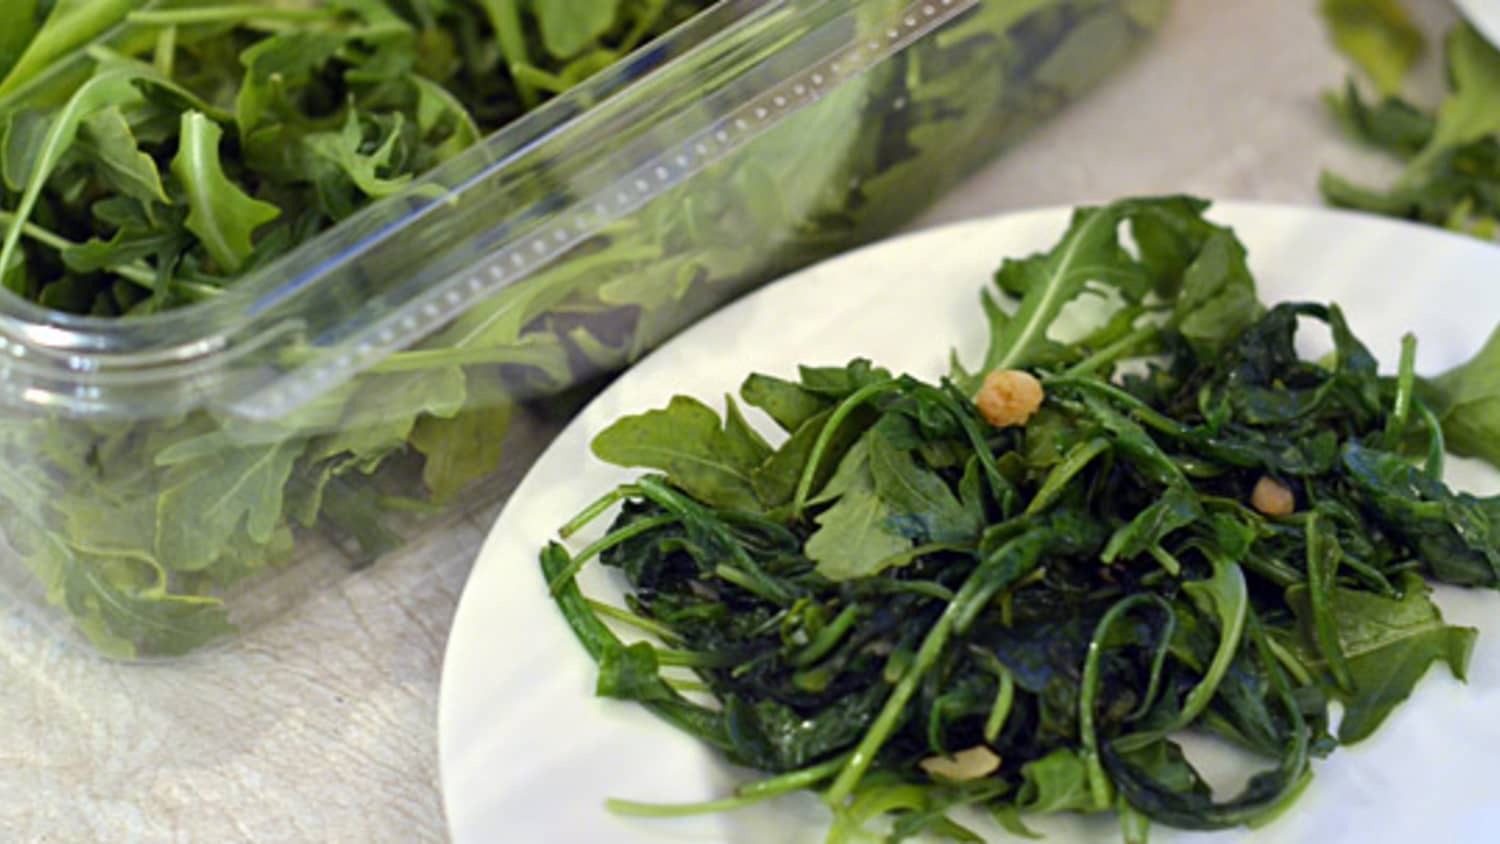 How to Use Up Salad Greens